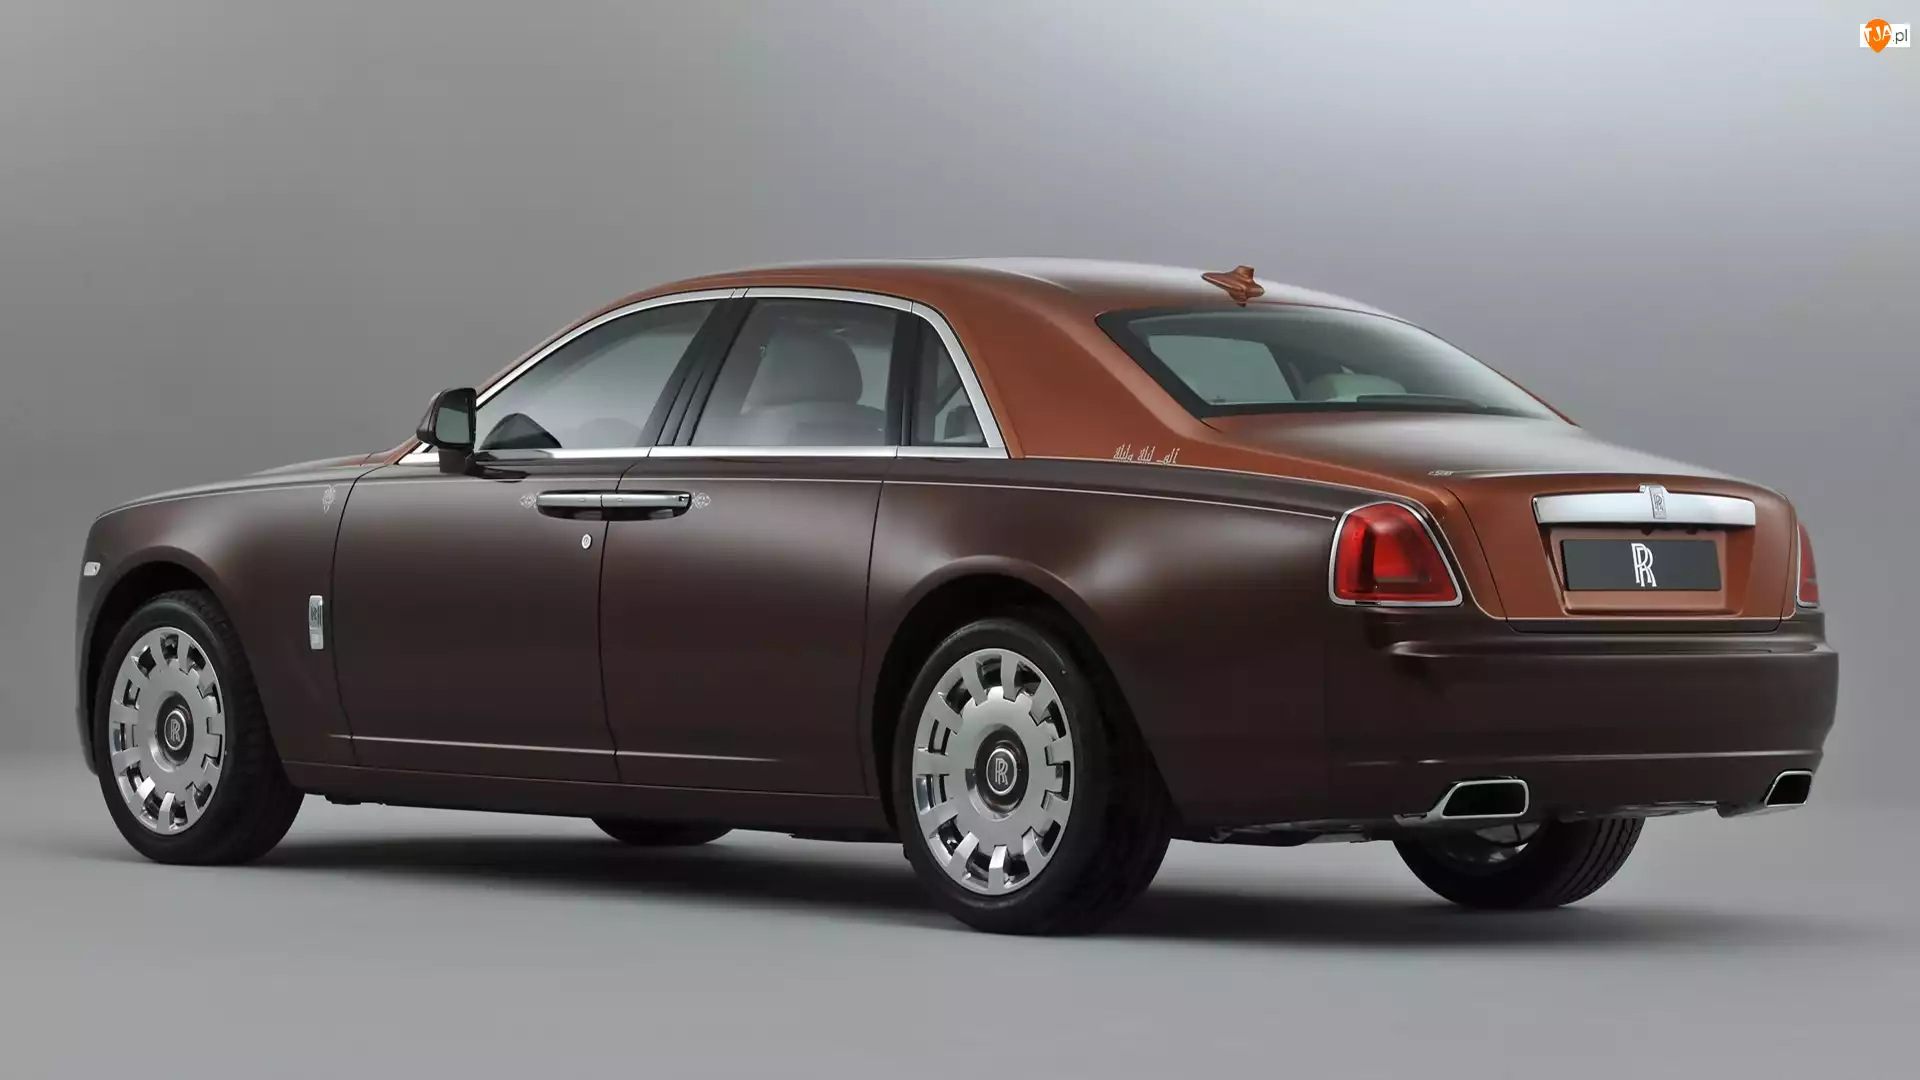 2013, Rolls Royce Ghost One Thousand And One Nights Edition